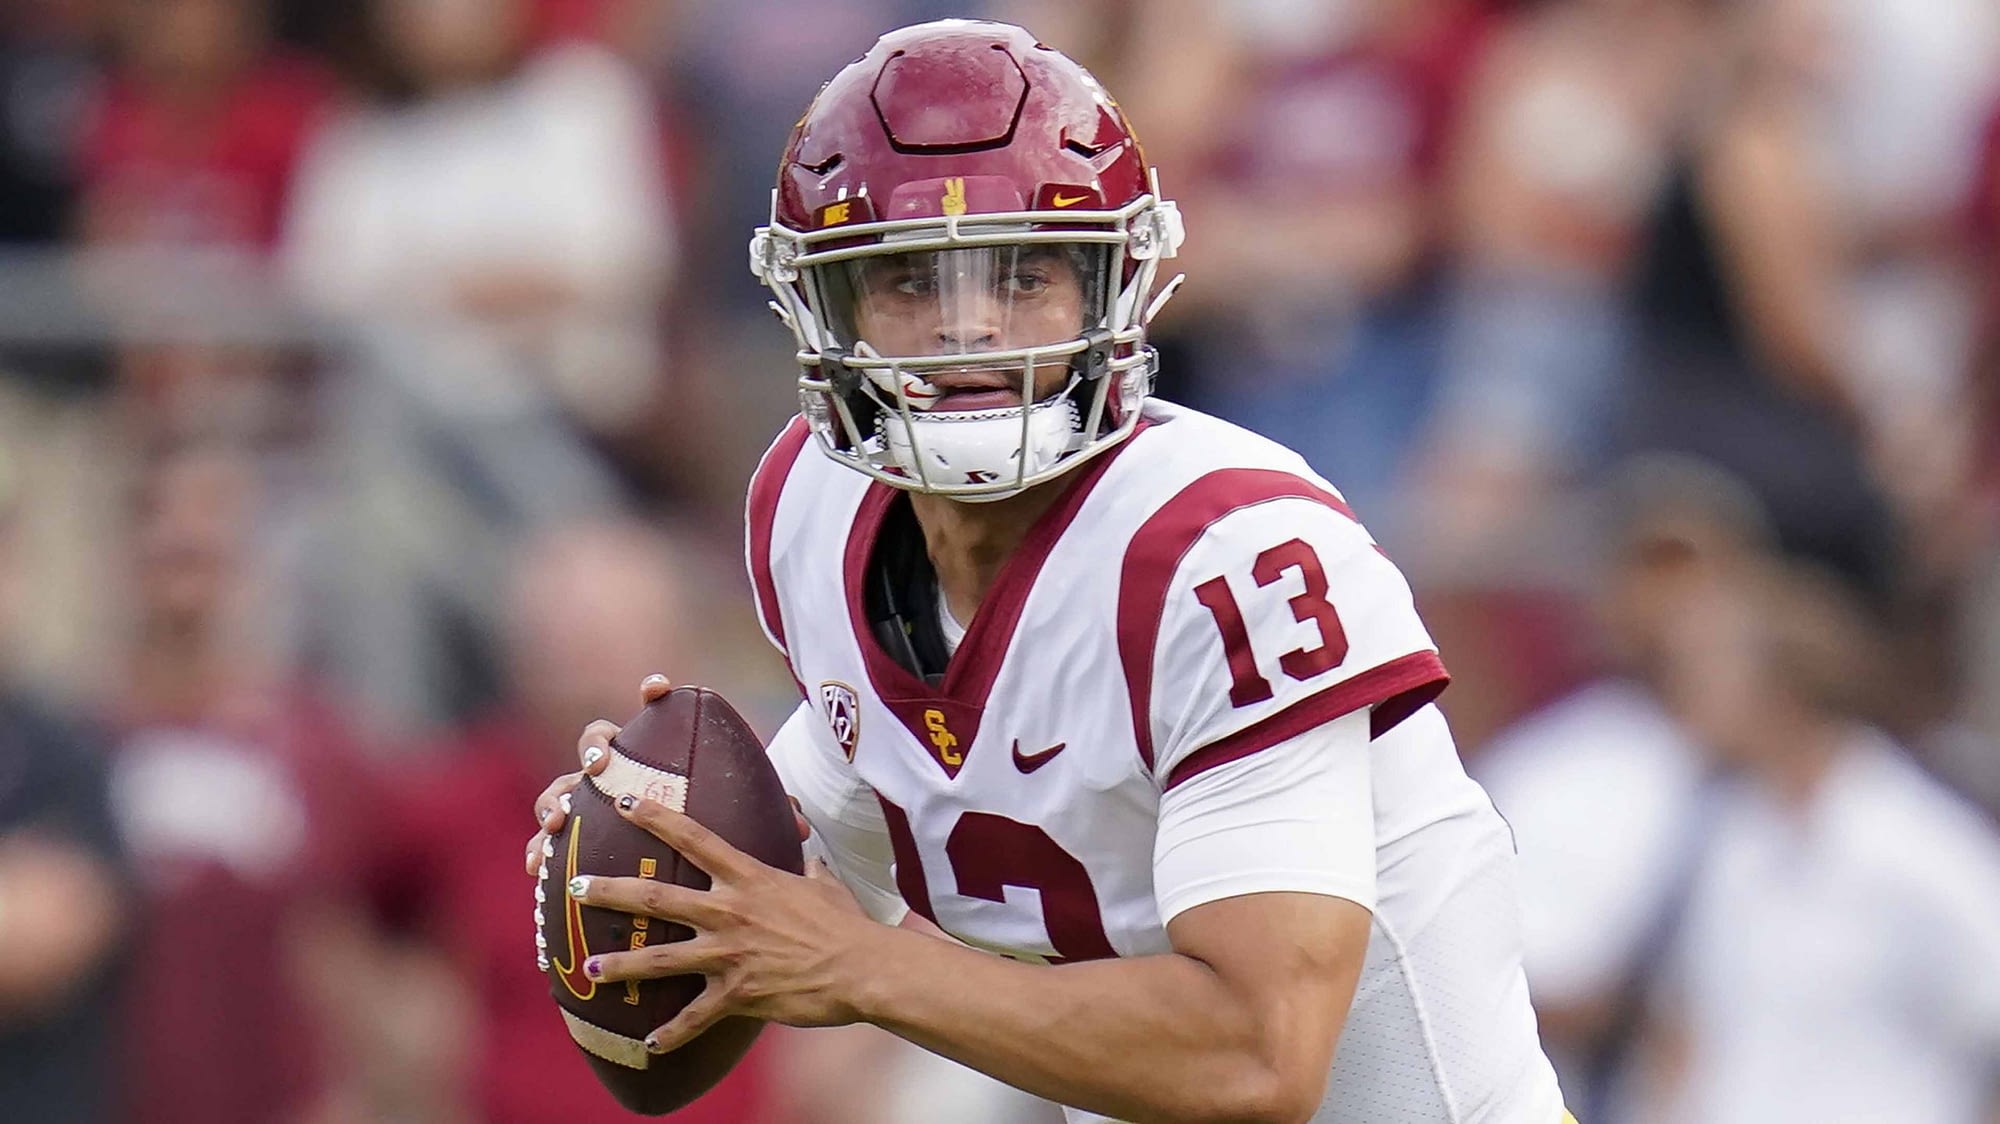 usc-vs-oregon-state-odds-prediction-trojans-should-cover-in-crucial-early-season-battle-with-beavers-september-24-2022